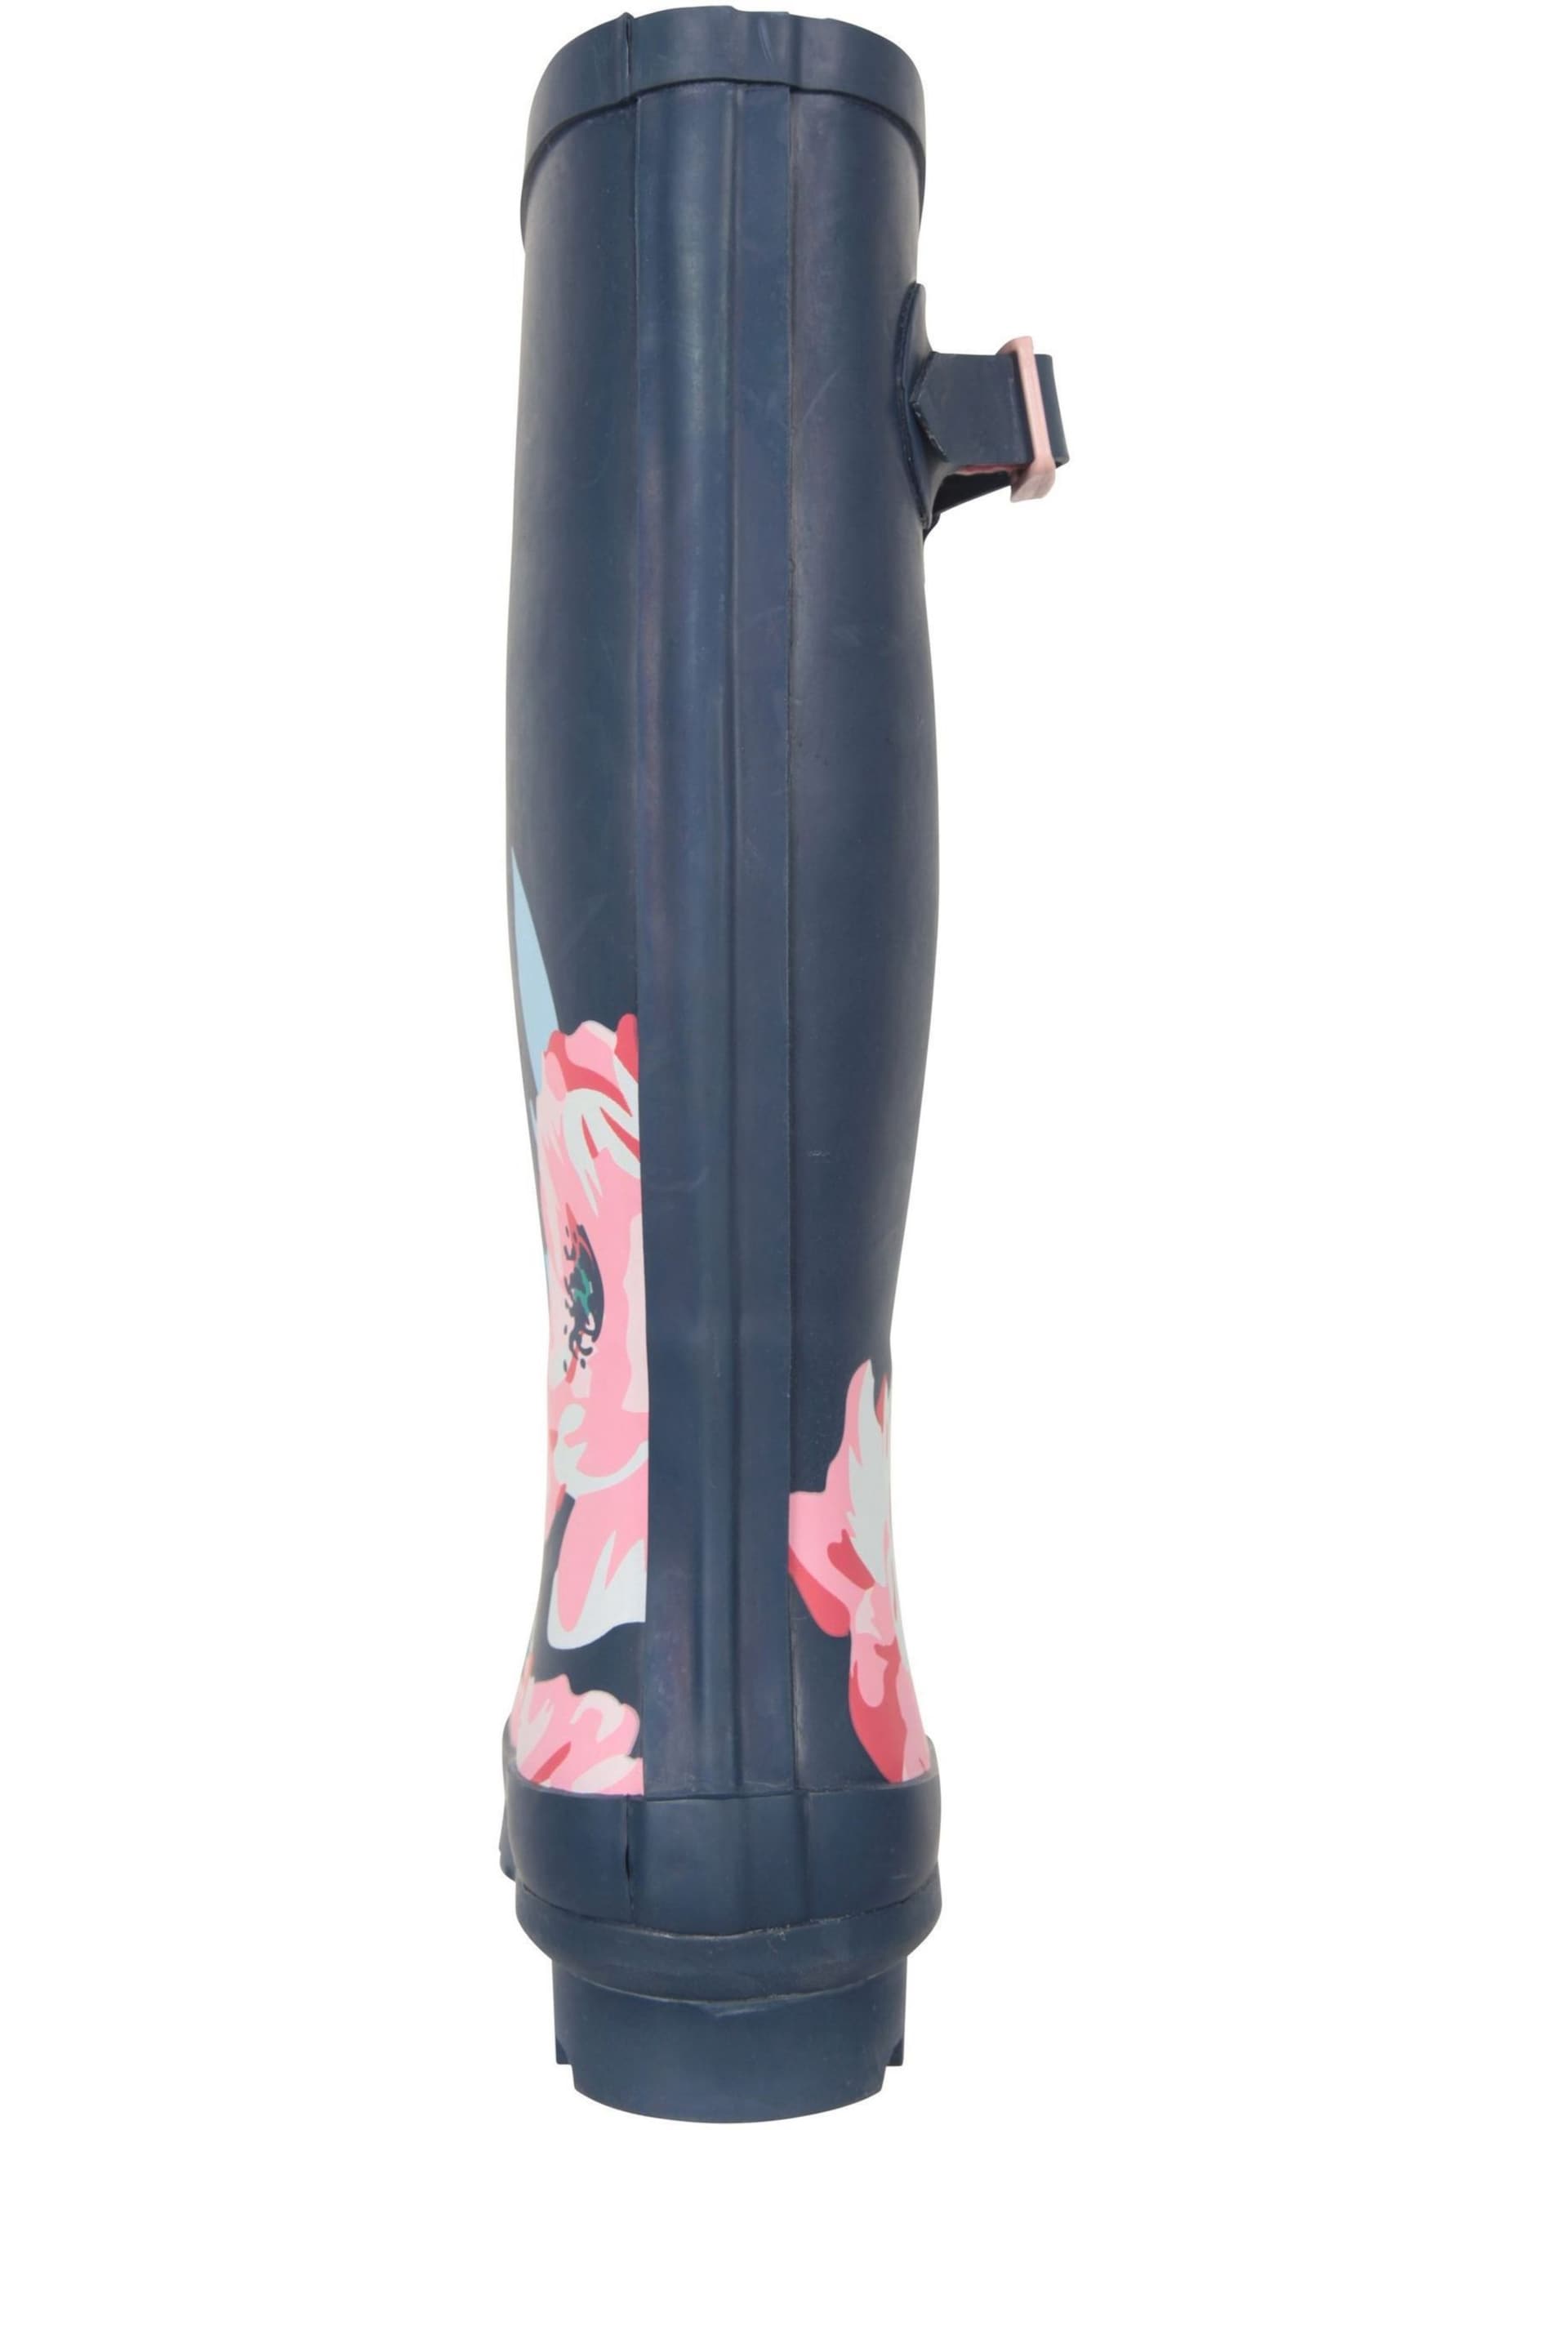 Mountain Warehouse Blue Womens Tall Buckle Printed Wellies - Image 5 of 6